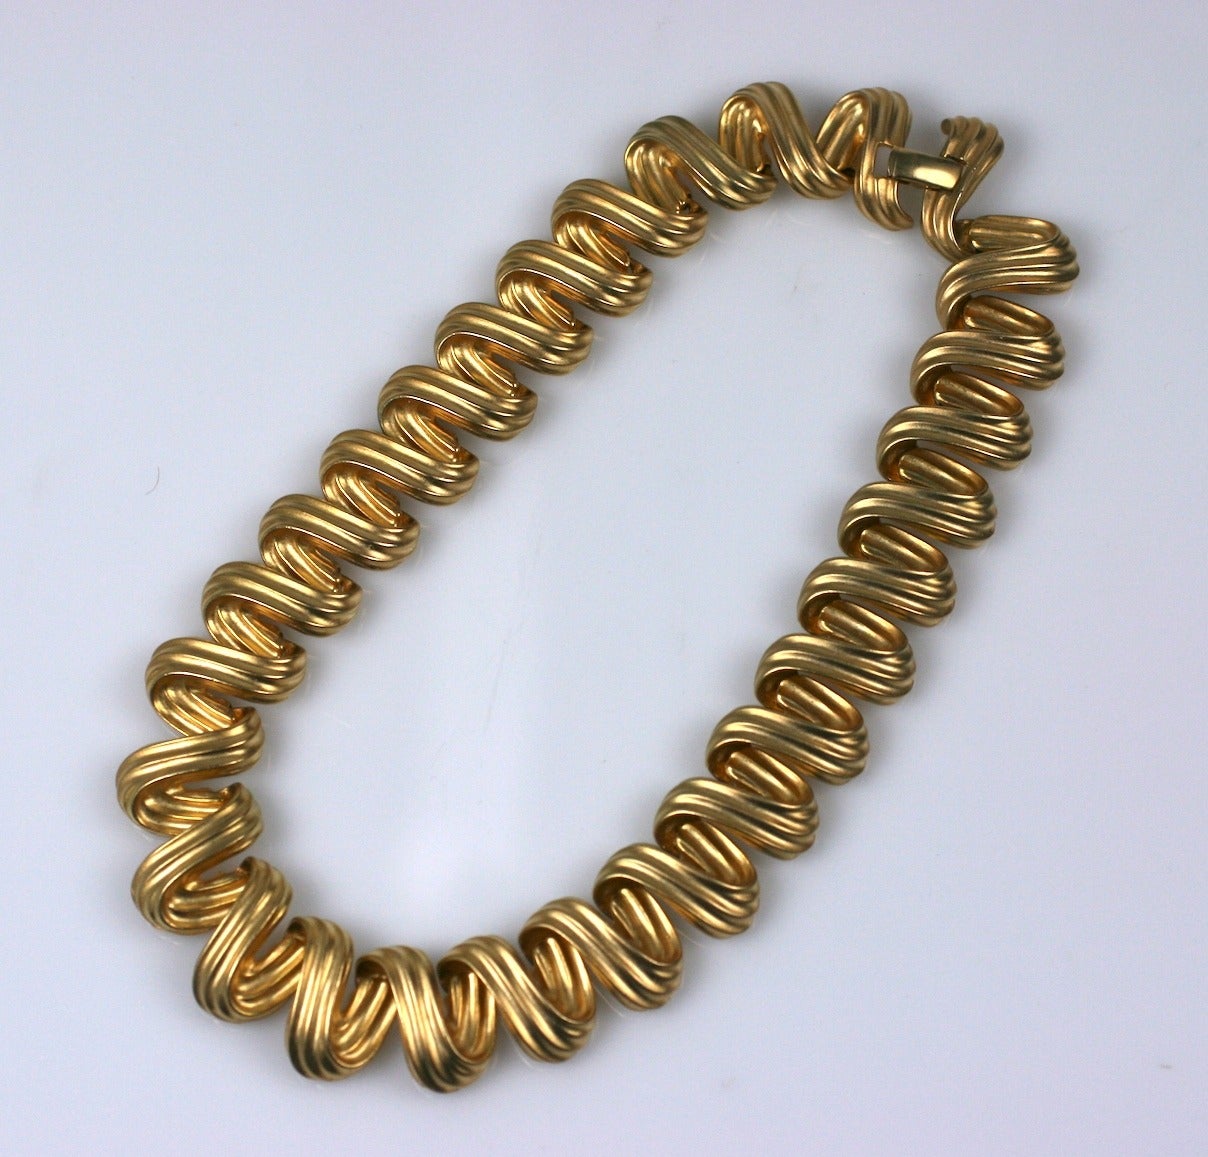 Attractive gilt necklace with links resembling looped articulated ribbons. 
15